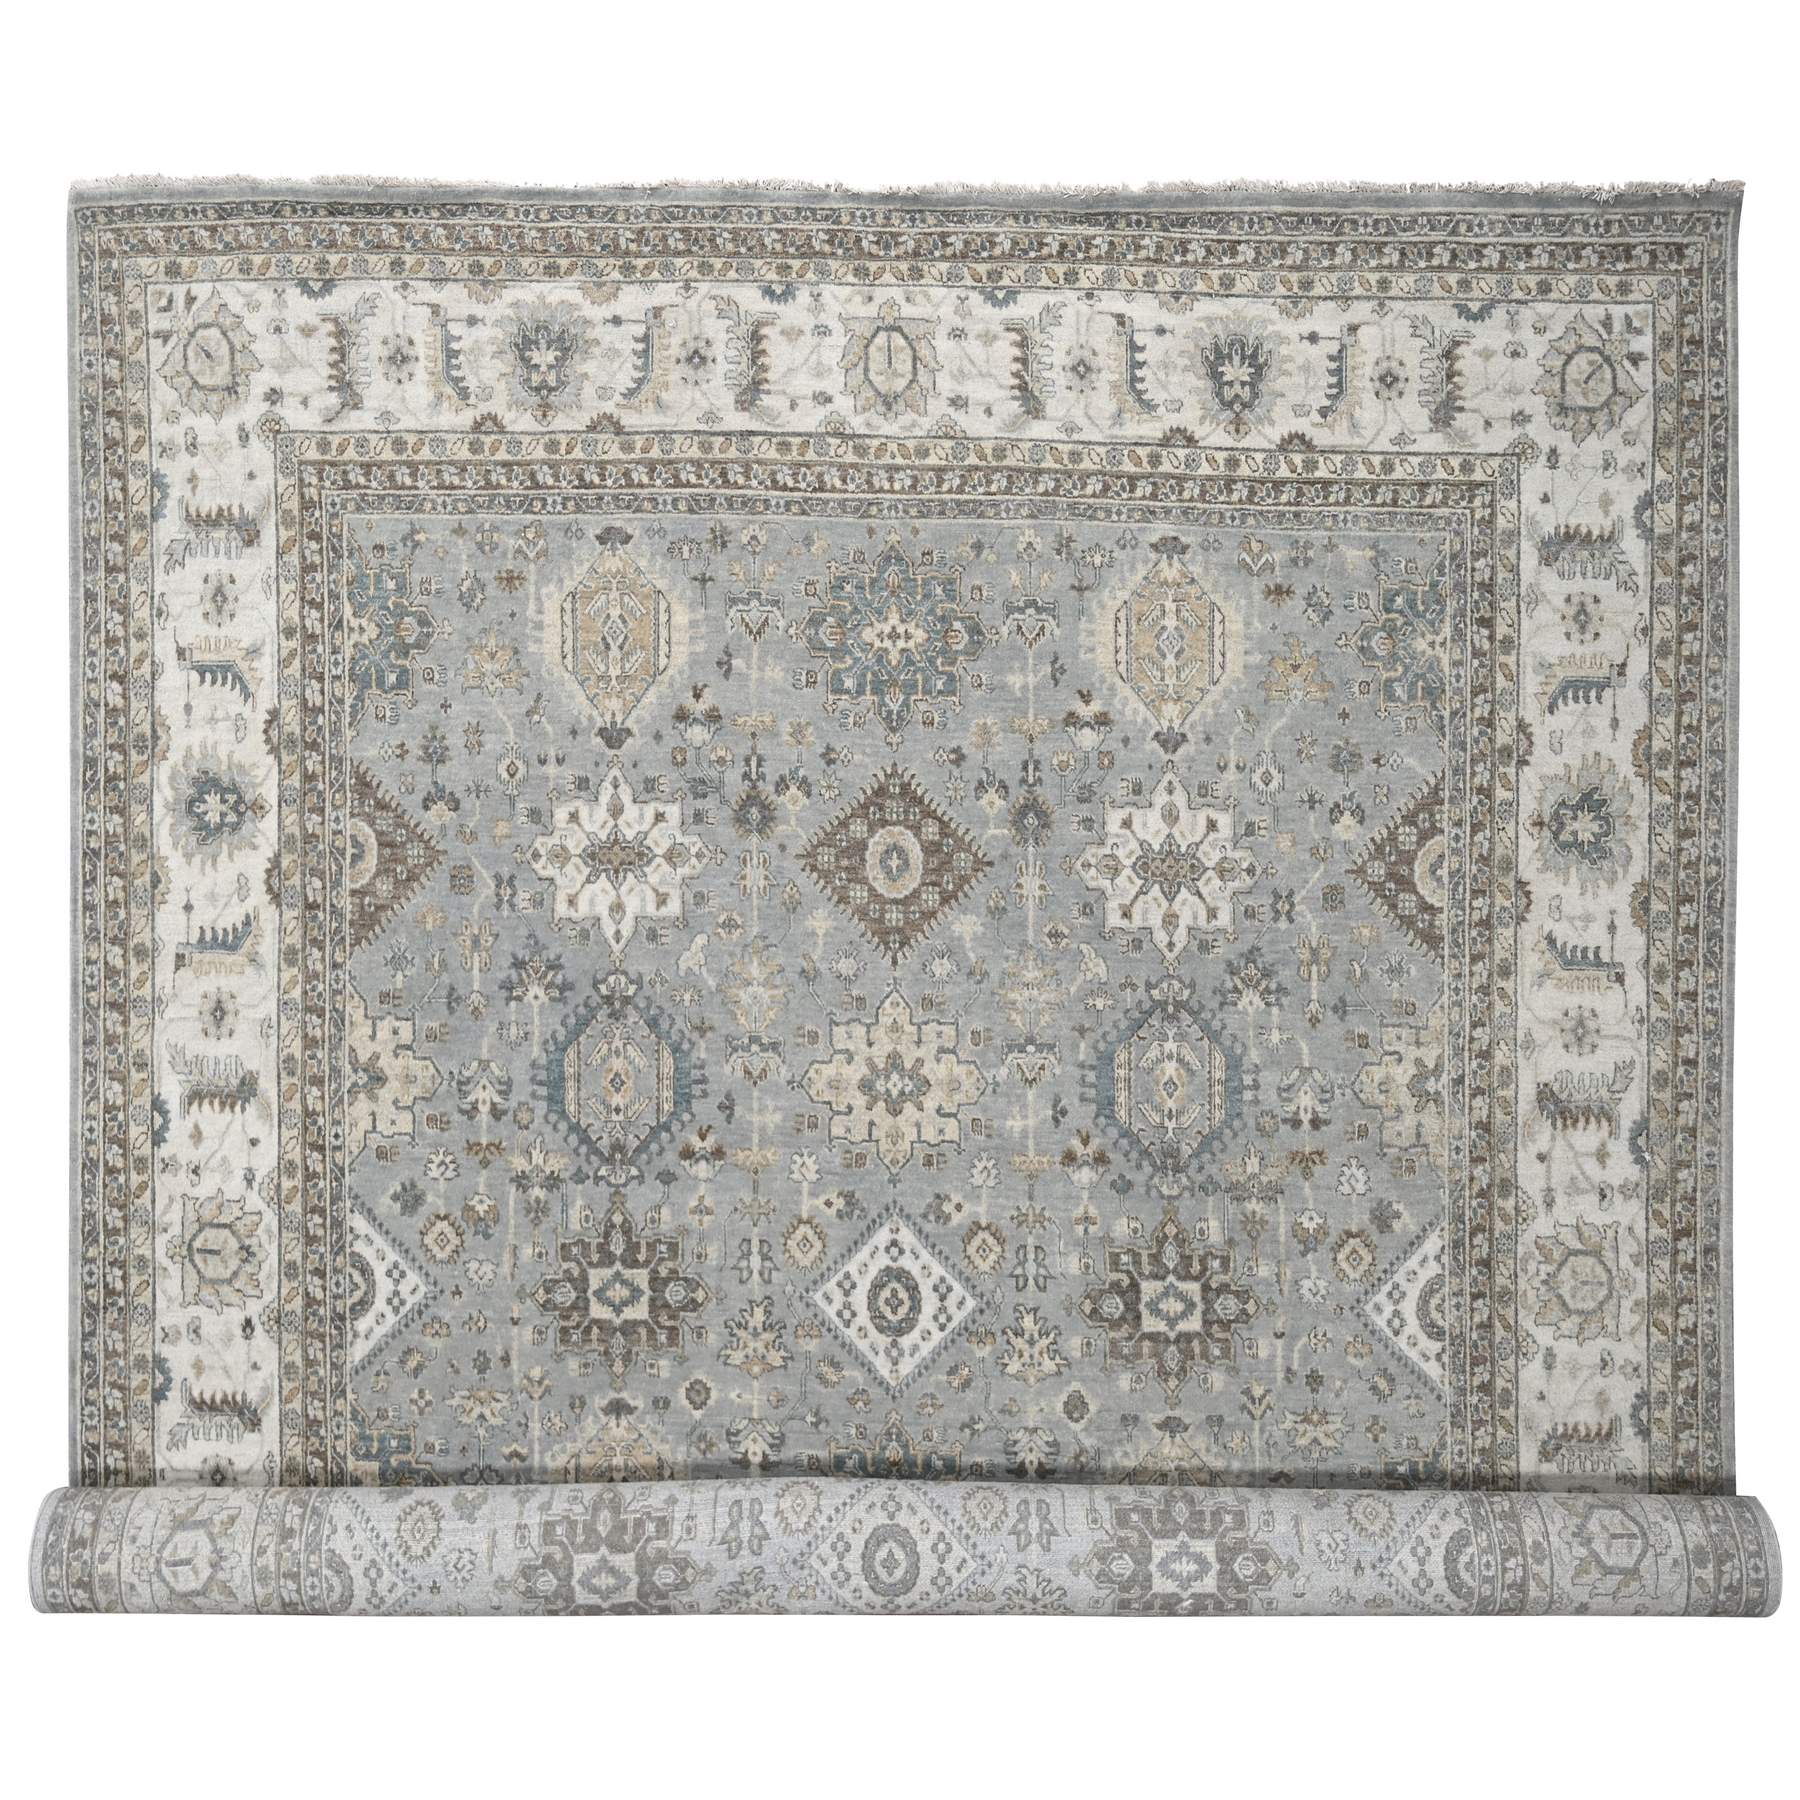  Wool Hand-Knotted Area Rug 12'1